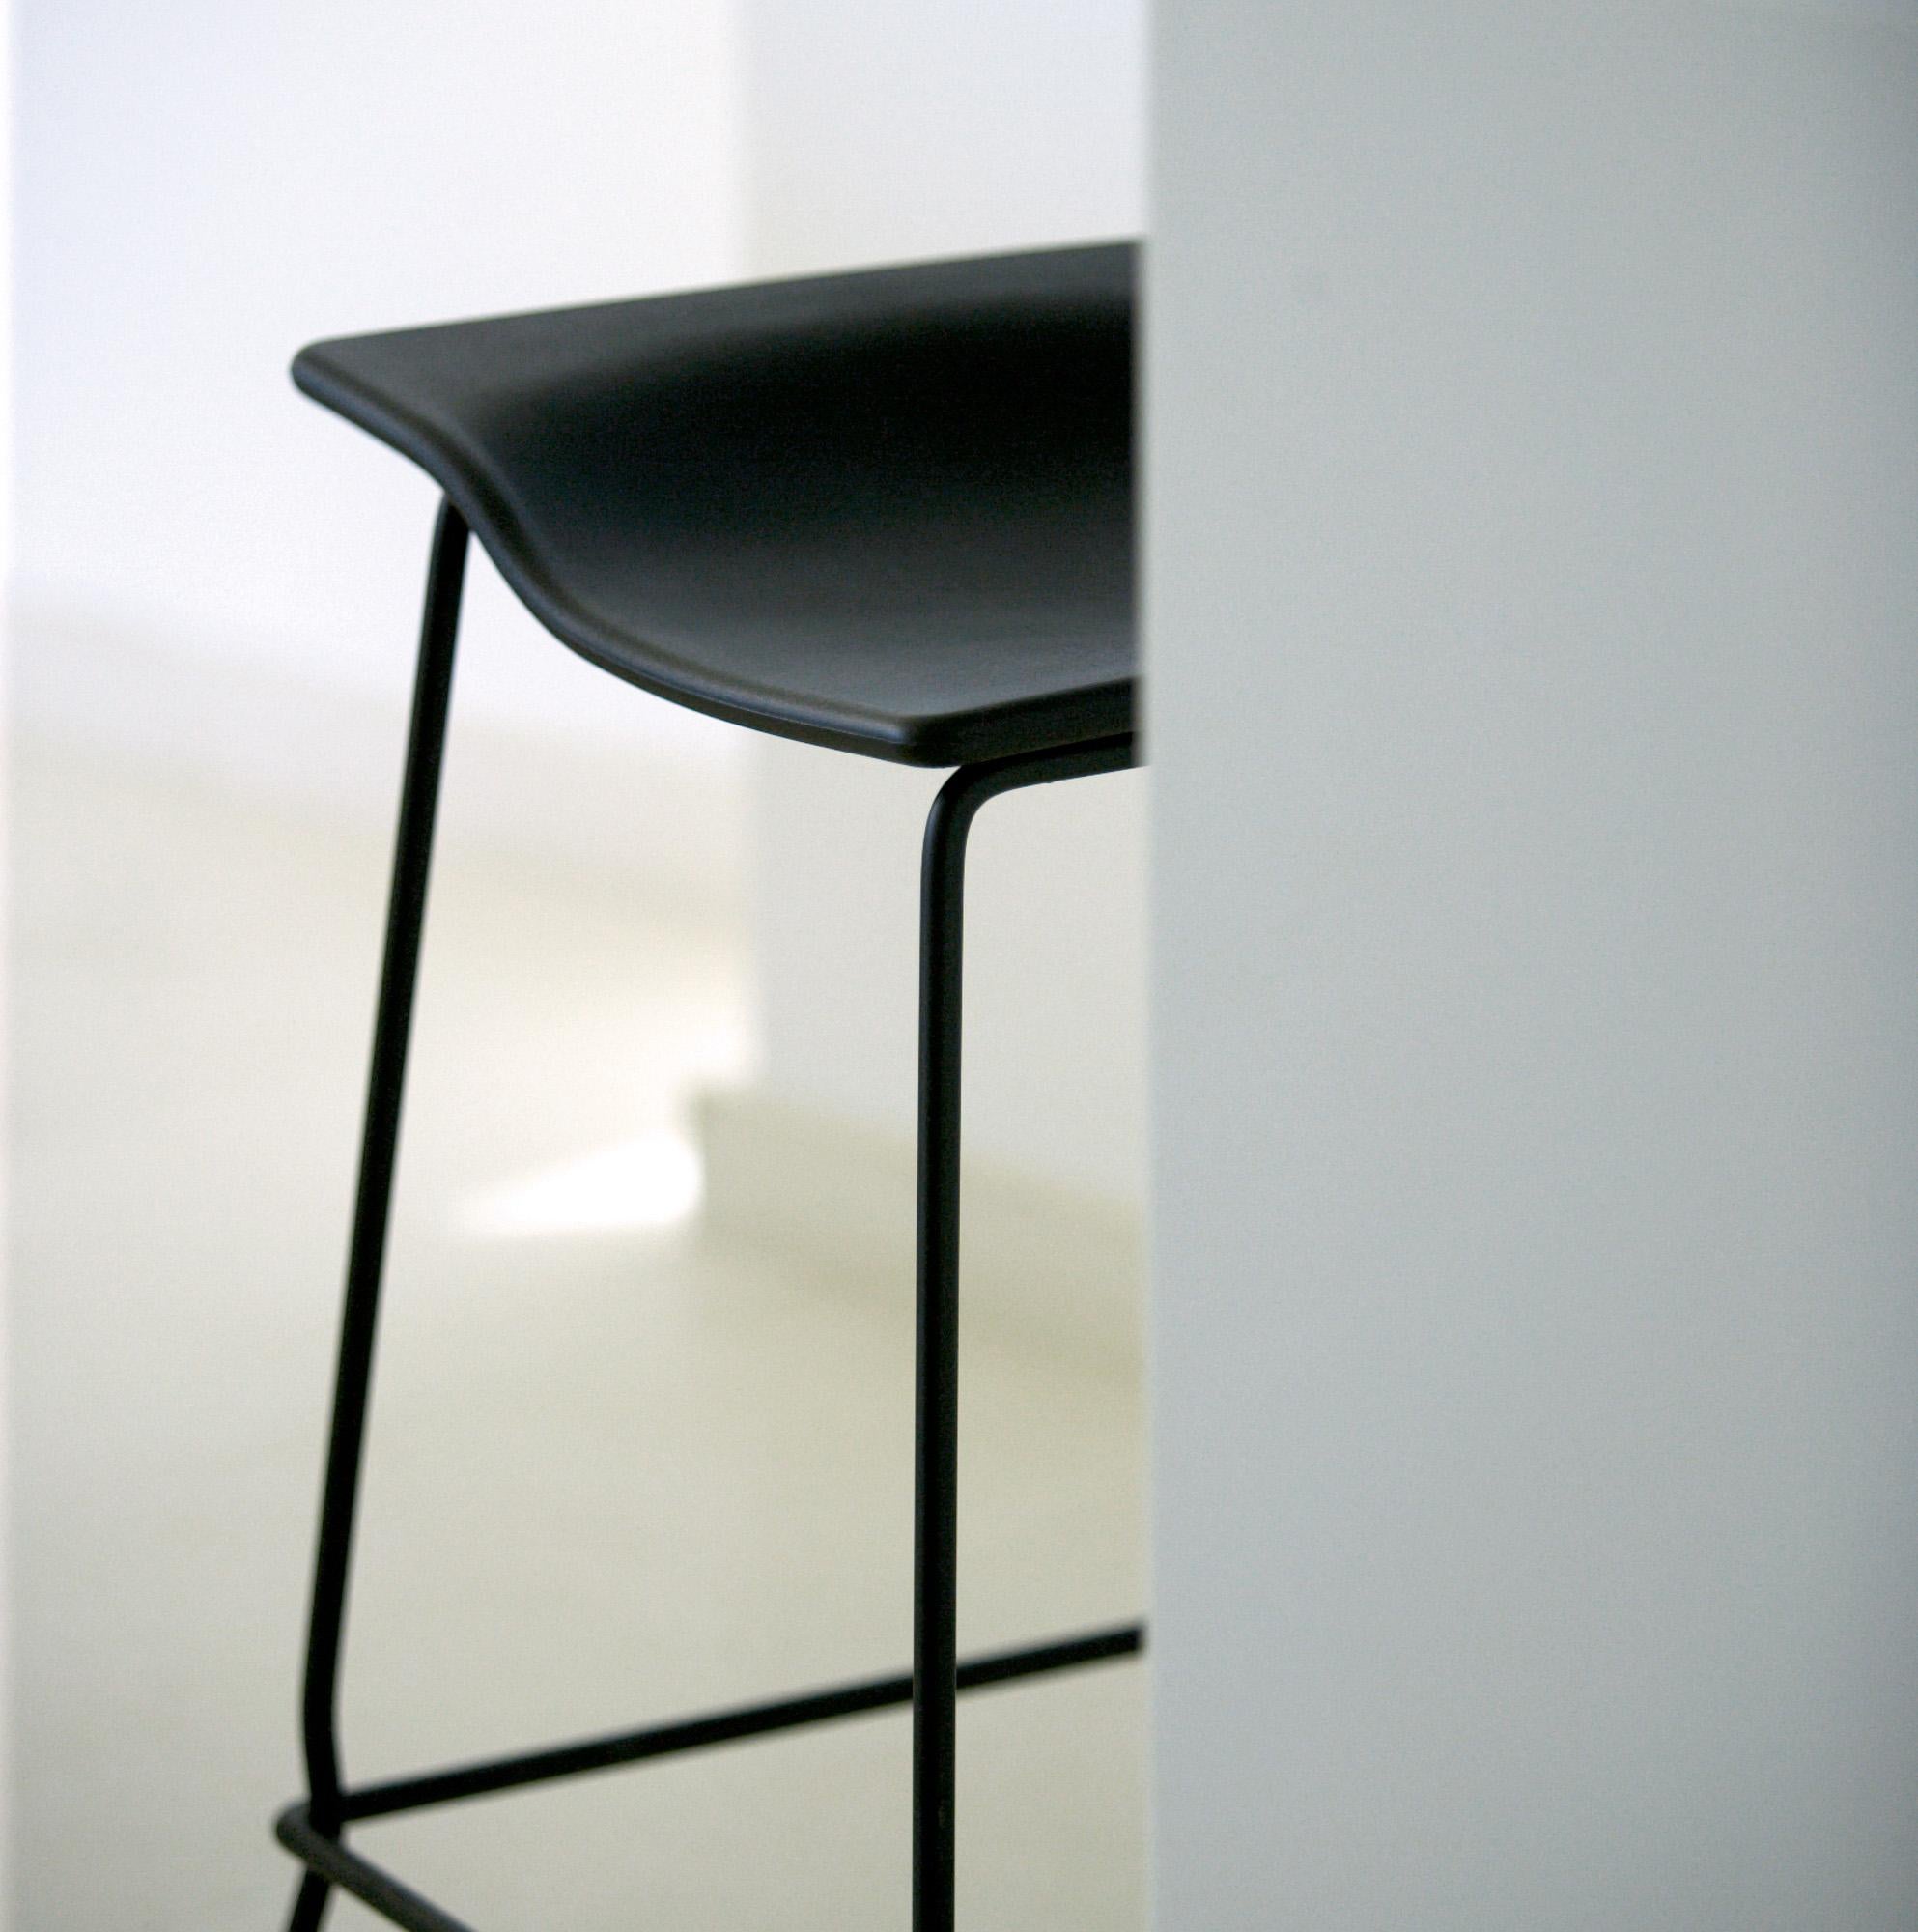 High stool by Spanish designer Patricia Urquiola for Viccarbe. 

A rotomoulded polyethylene seat with a lacquered steel frame and stainless steel footrest.

Its structural design has become a contemporary classic.

Its seat design makes it a very